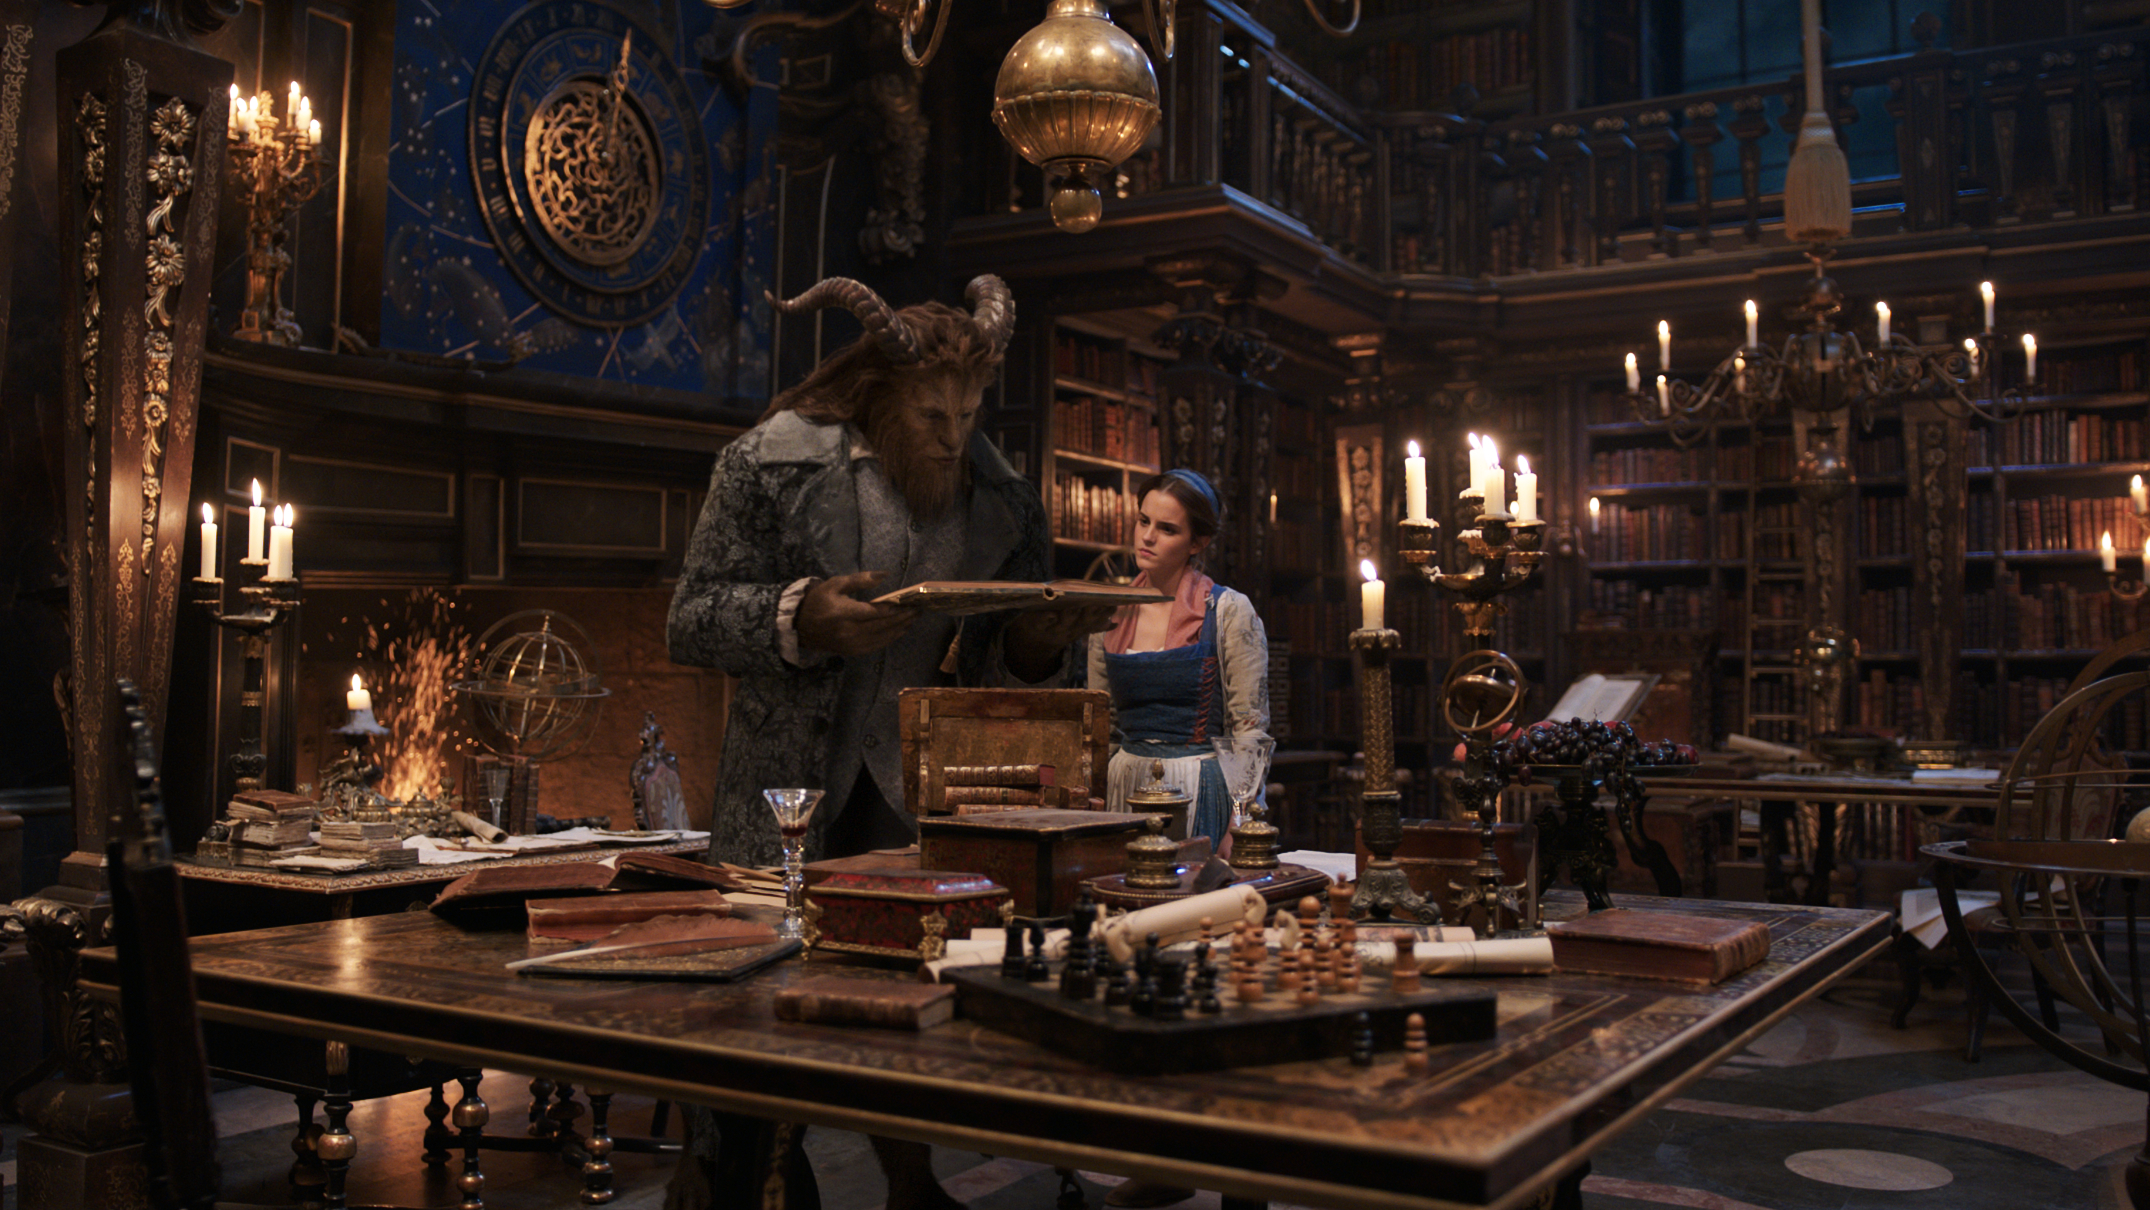 The Beast (Dan Stevens) and Belle (Emma Watson) in the castle library in Disney's BEAUTY AND THE BEAST. Original Image via Collider.com | onetakekate.com